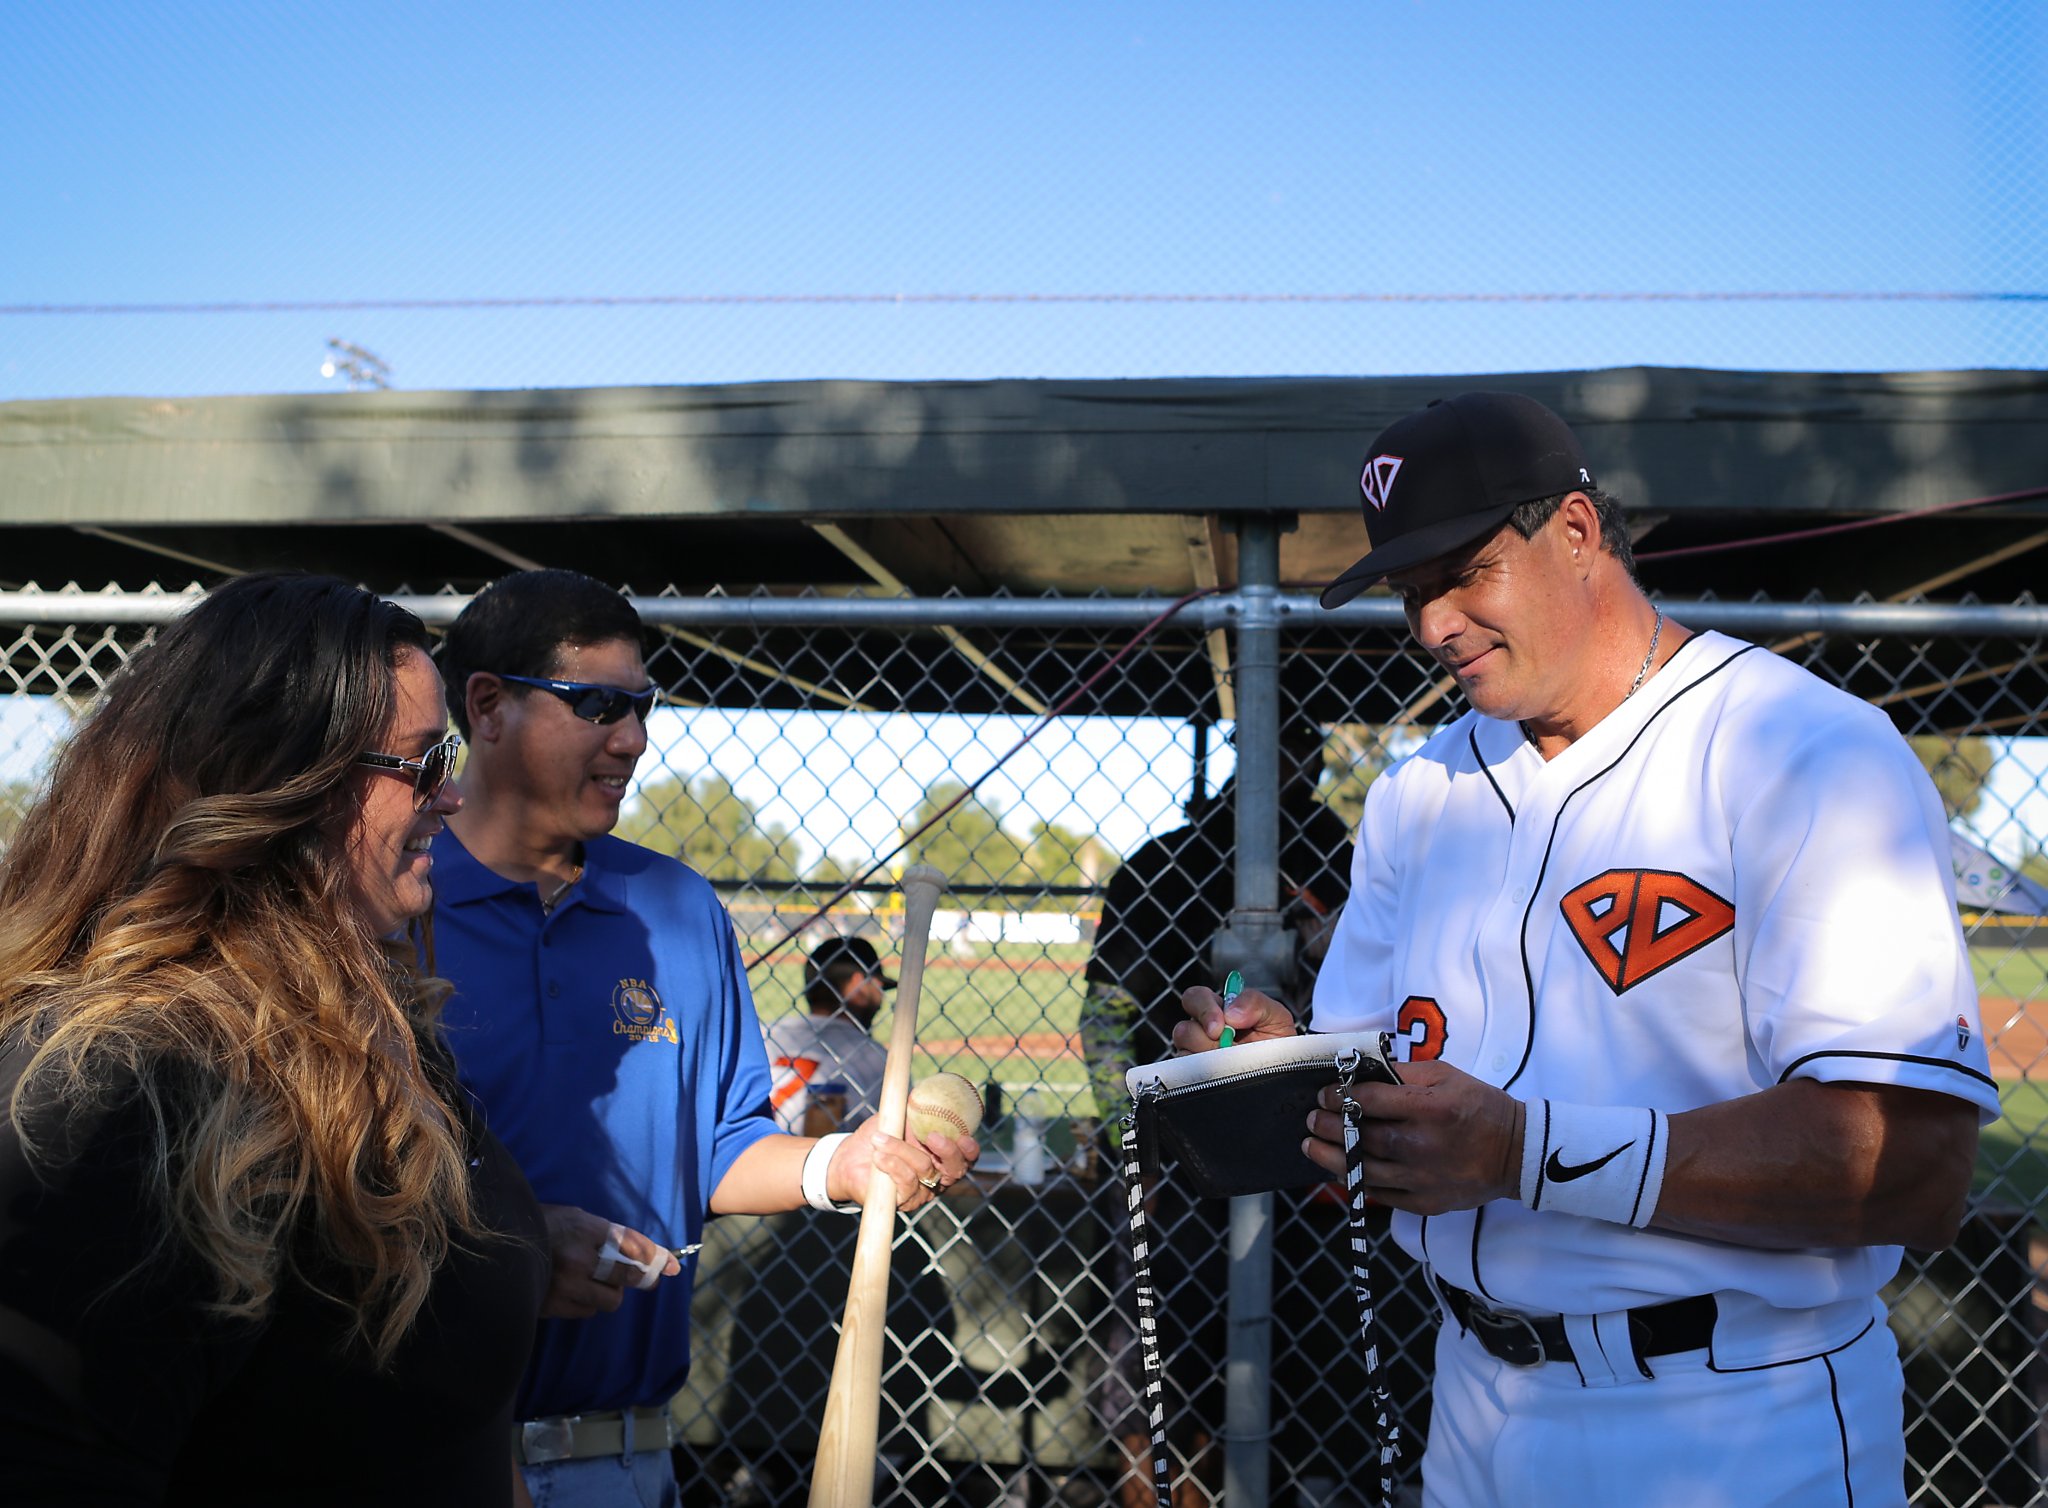 Jose Canseco returning to play for Pittsburg Diamonds